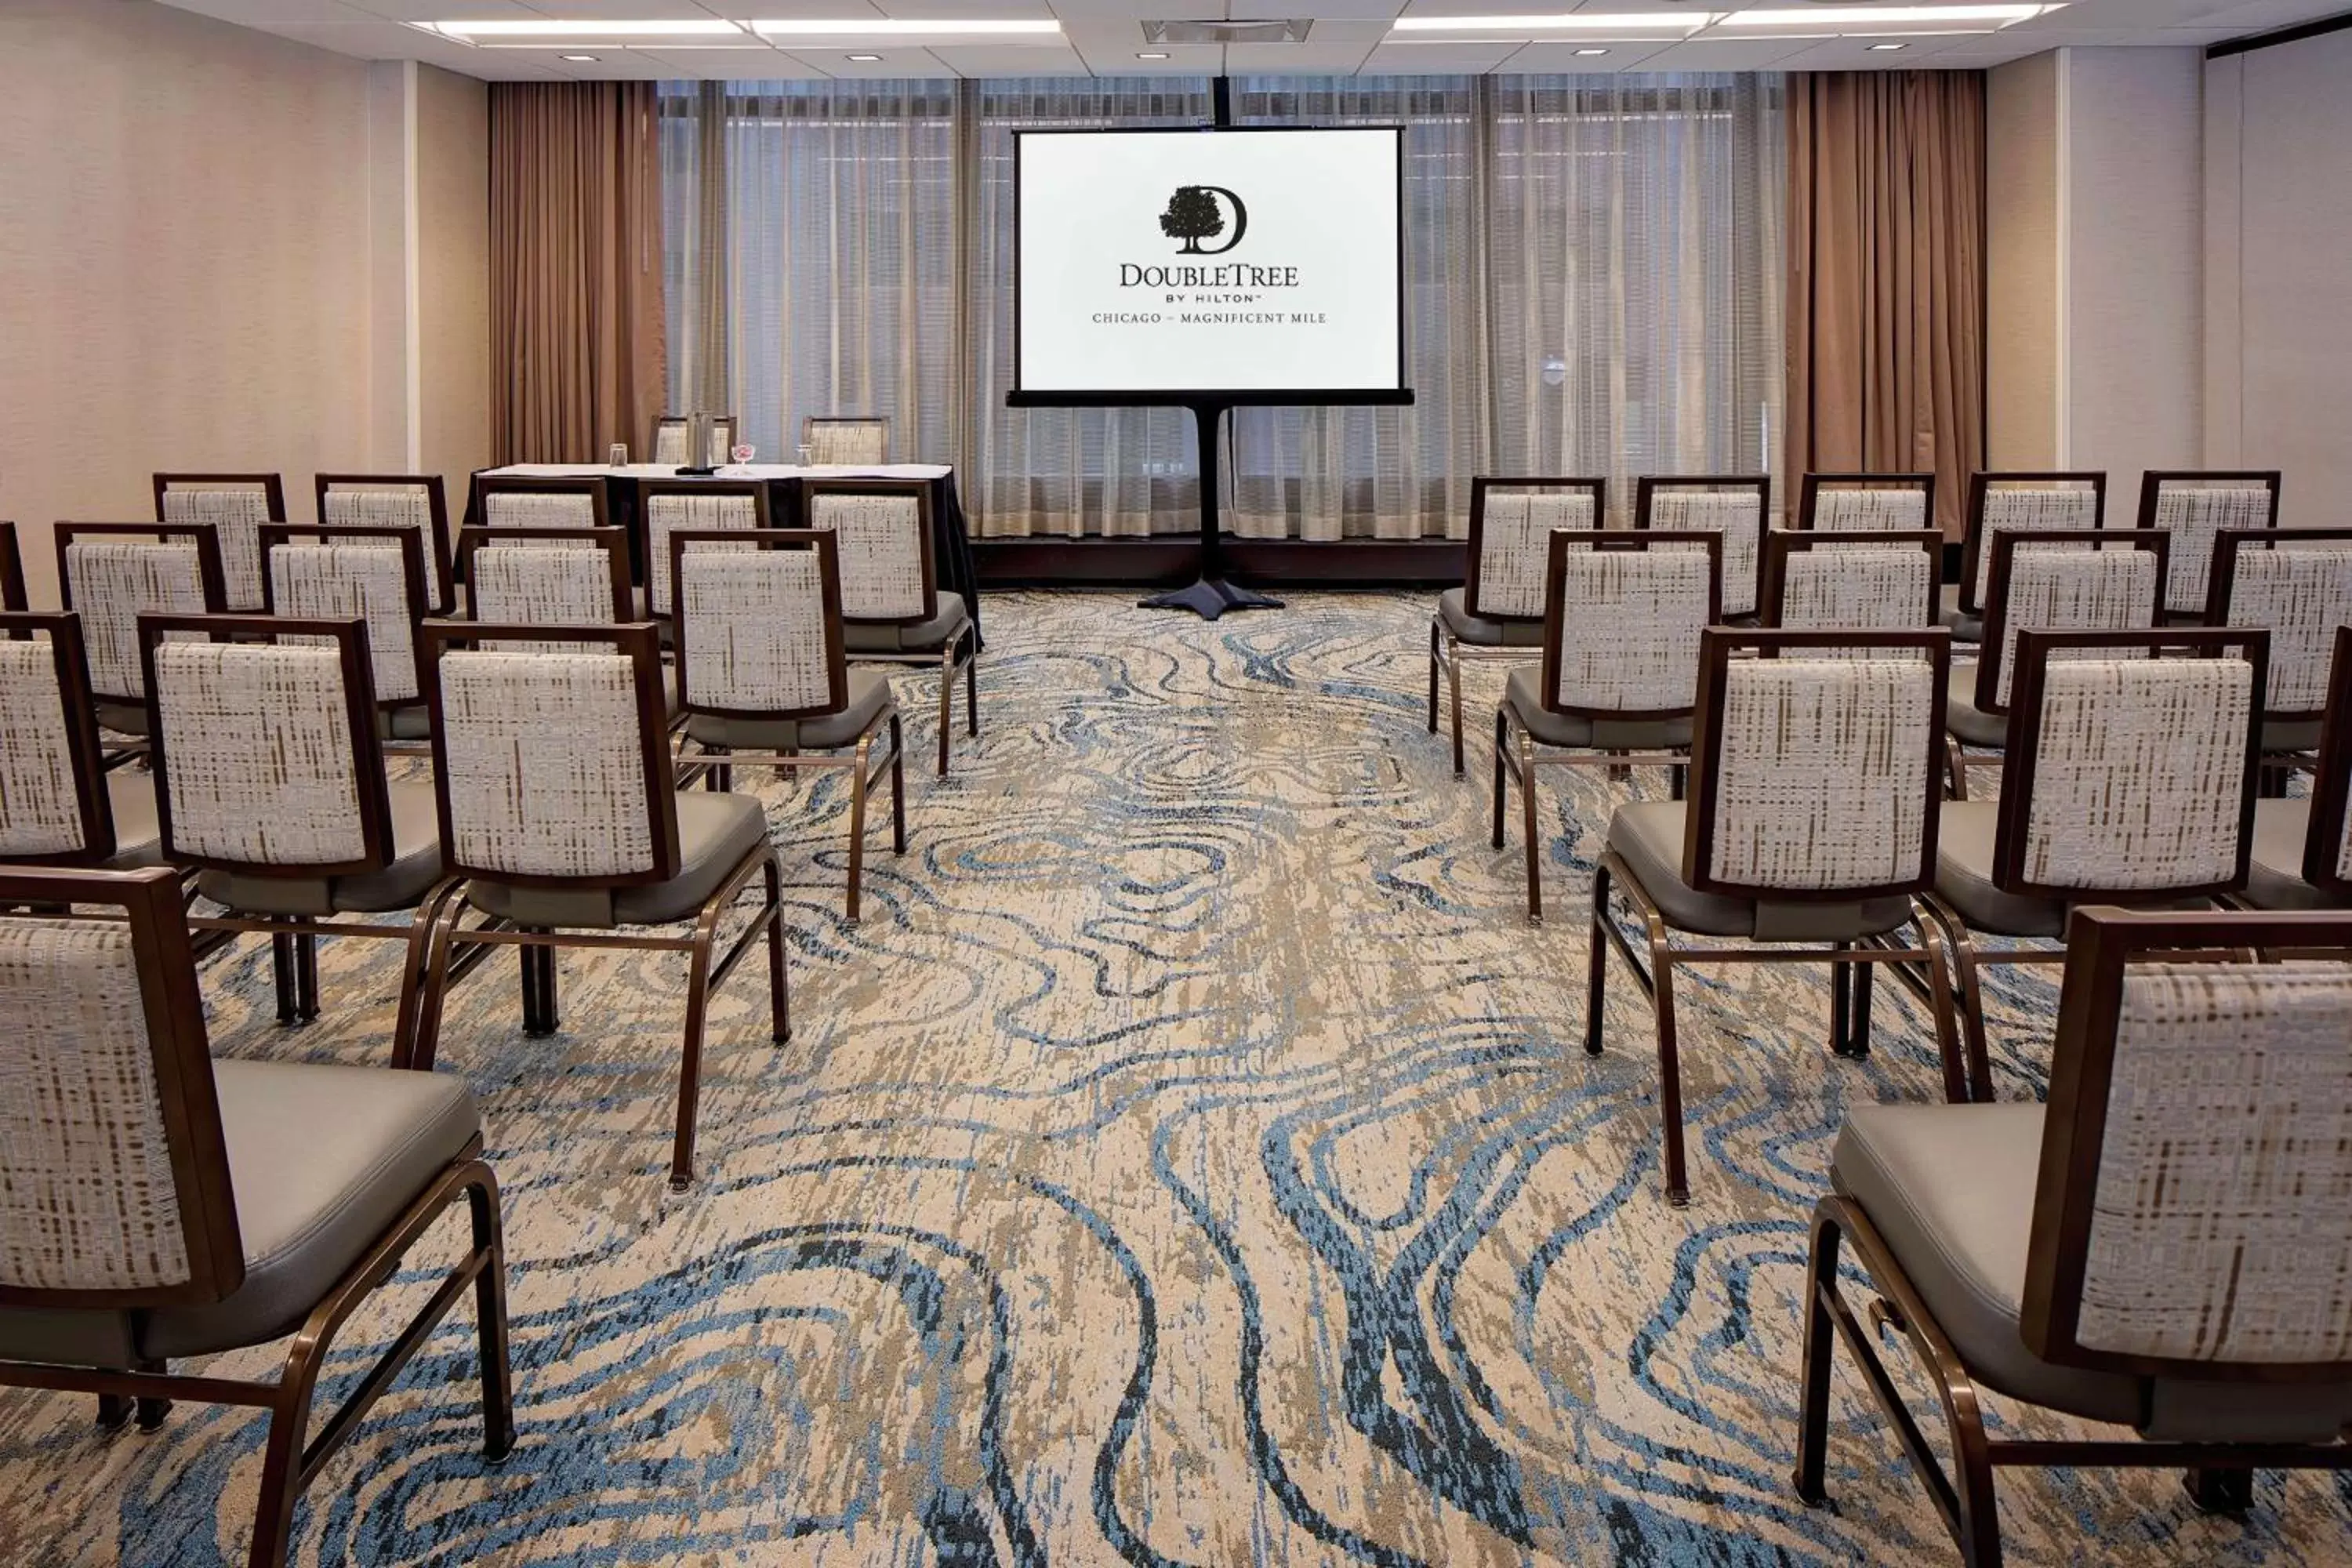 Meeting/conference room in DoubleTree by Hilton Chicago Magnificent Mile